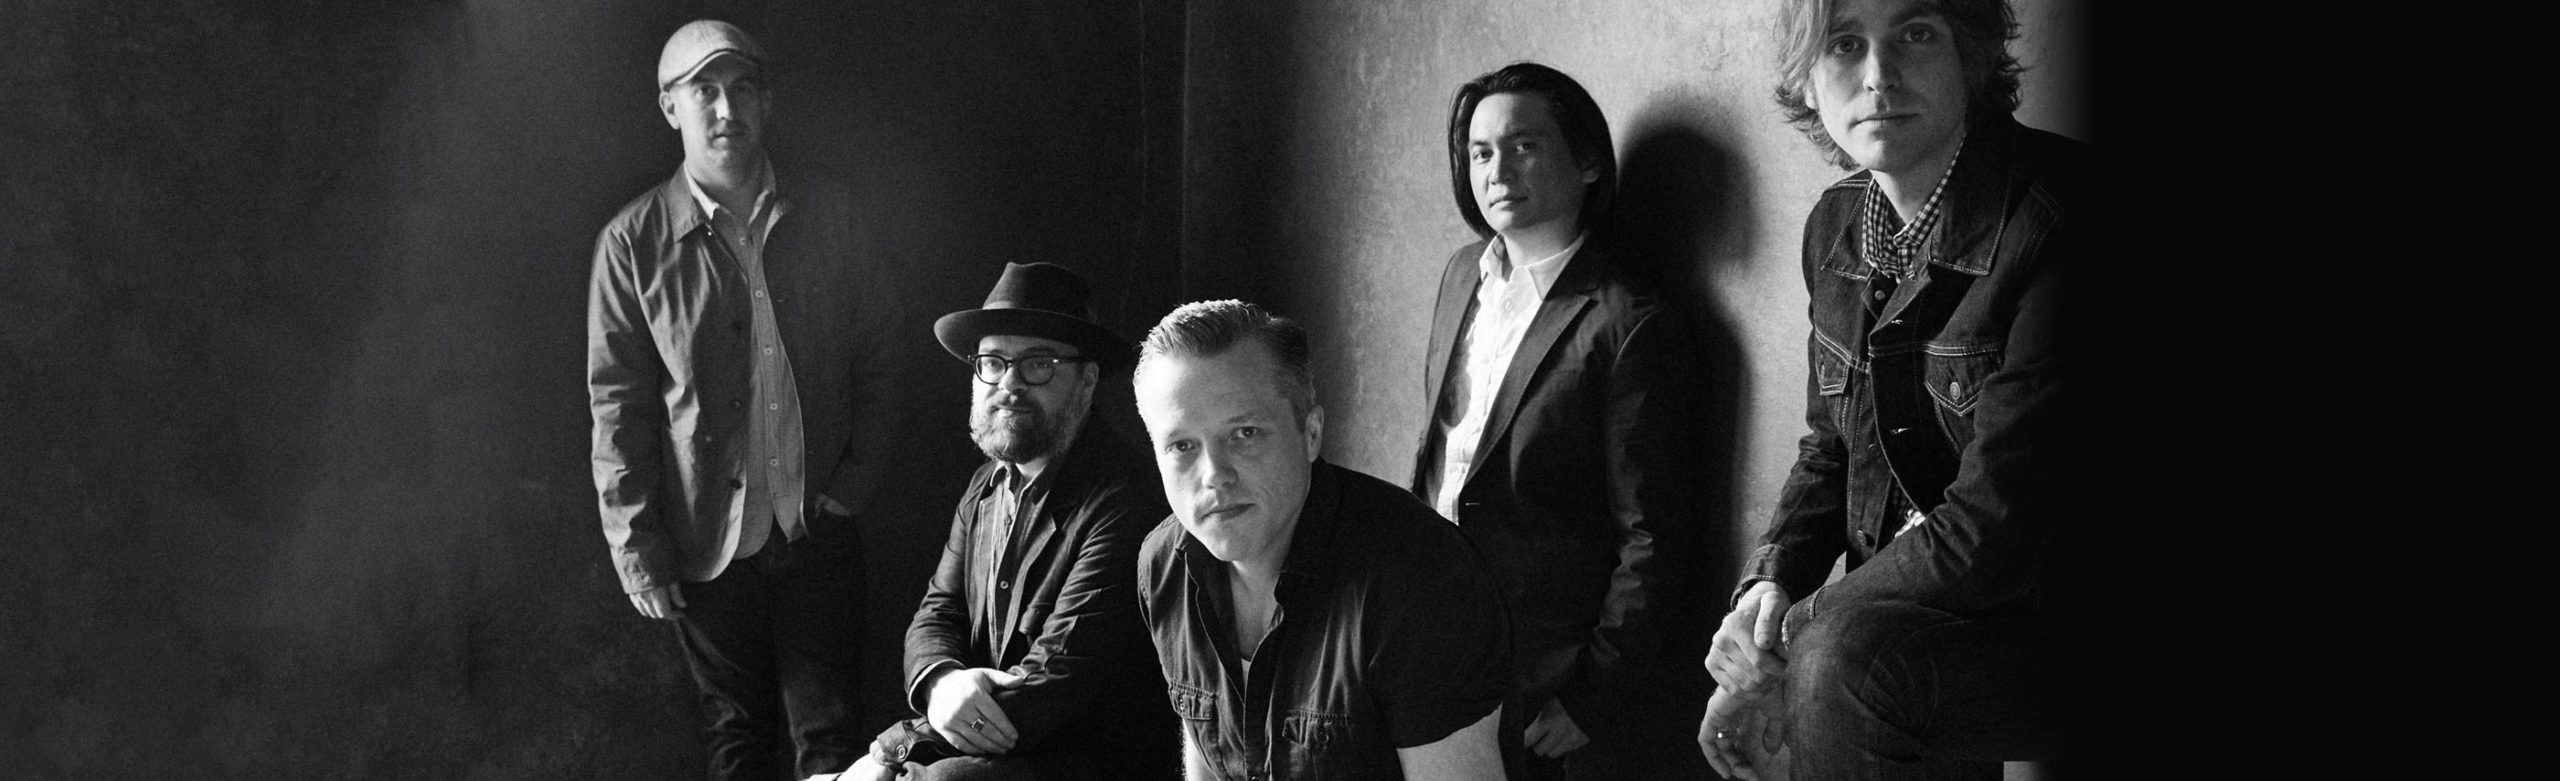 JUST ANNOUNCED: Grammy Award Winner Jason Isbell and The 400 Unit Return to Montana Image